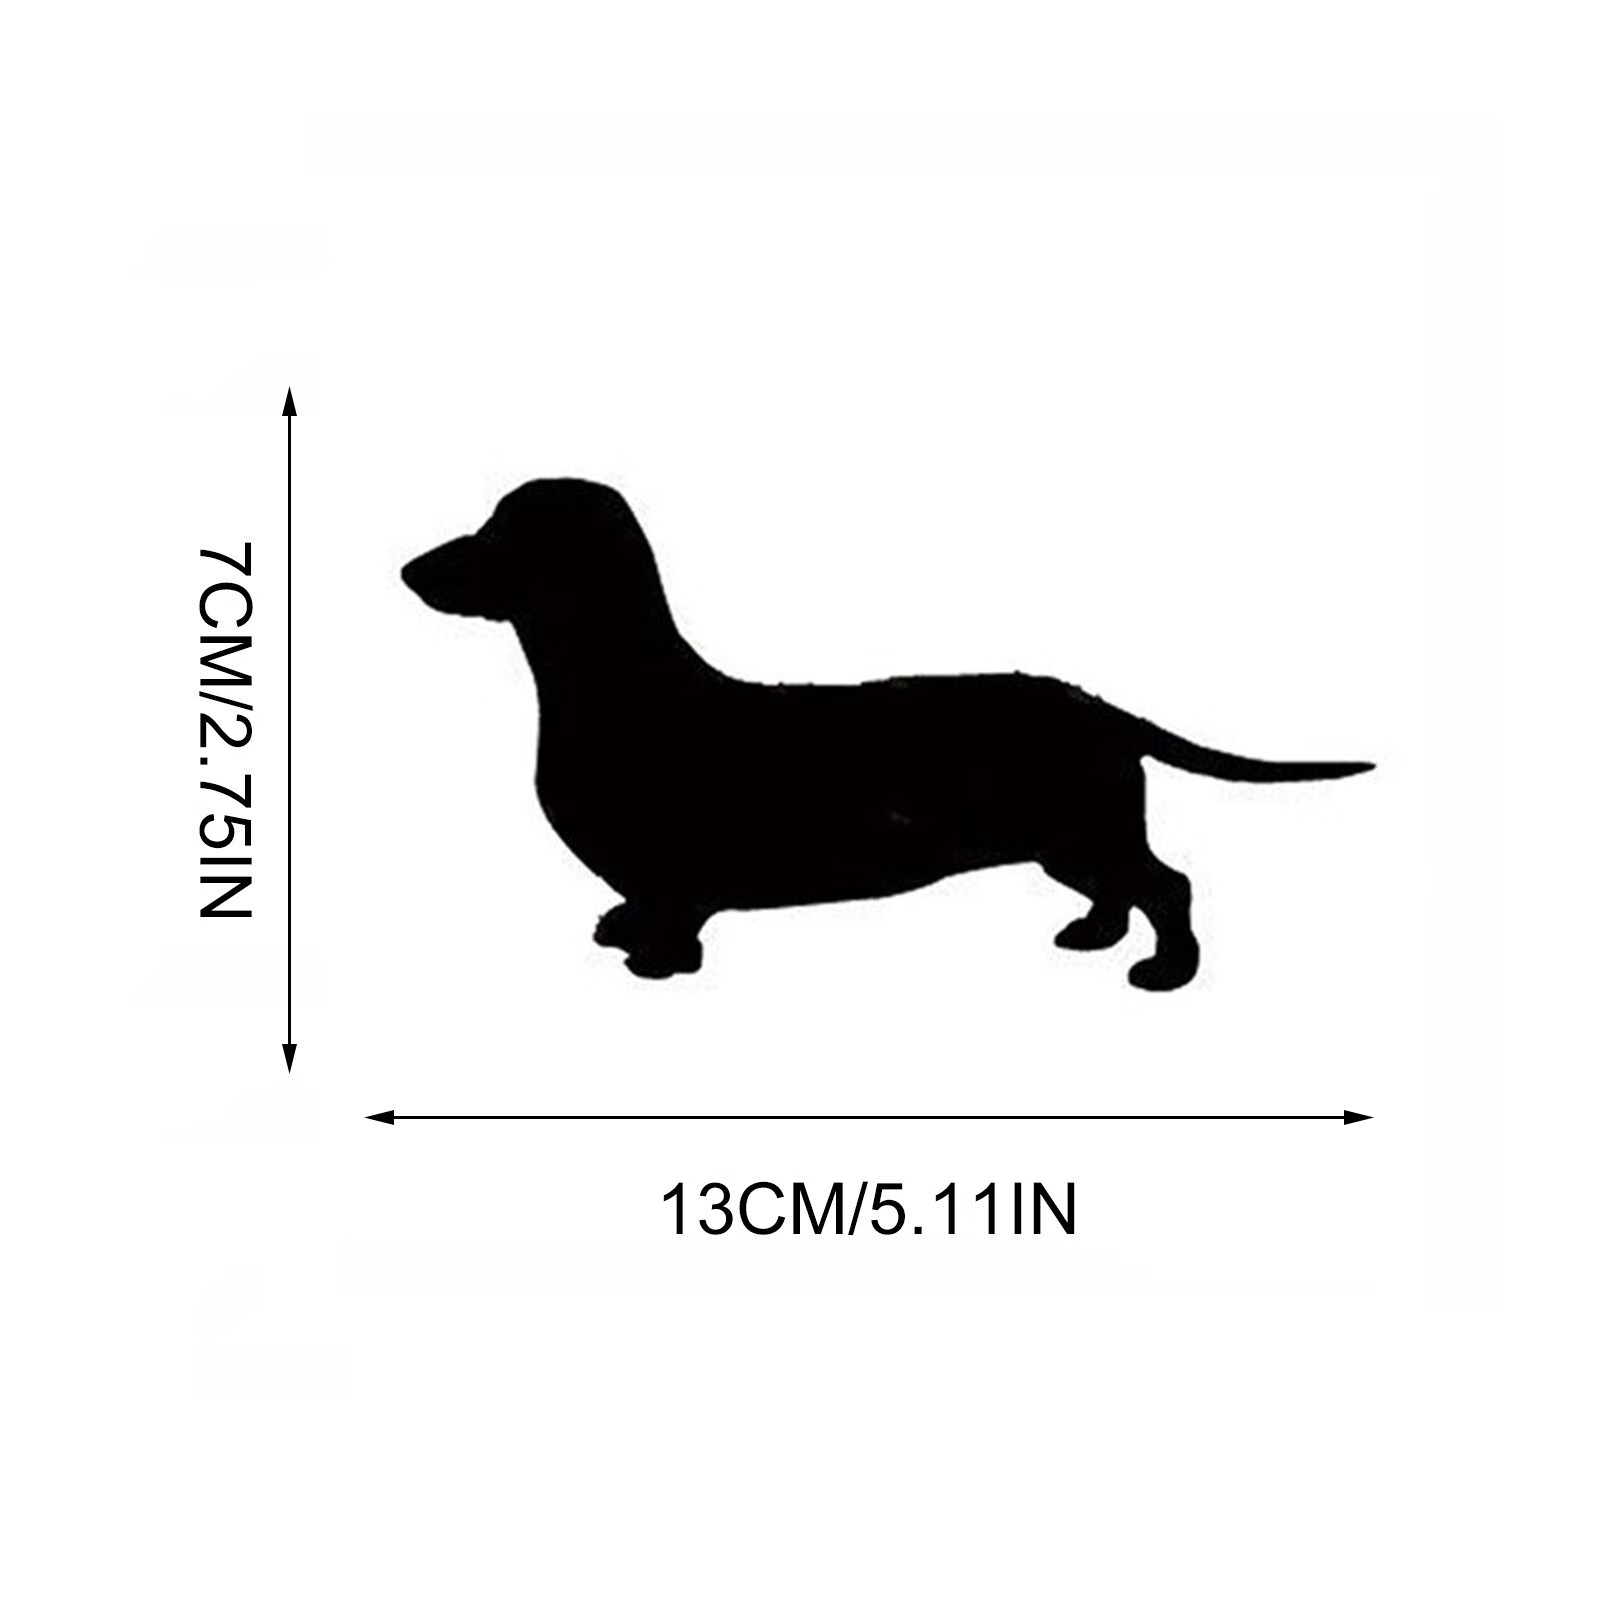 WOCLEILIY Dog Car Stickers Dachshunds Personality Fun Mobile Phone Stickers Computer Stickers Cup Stickers Body Stickers Animal D - image 3 of 6